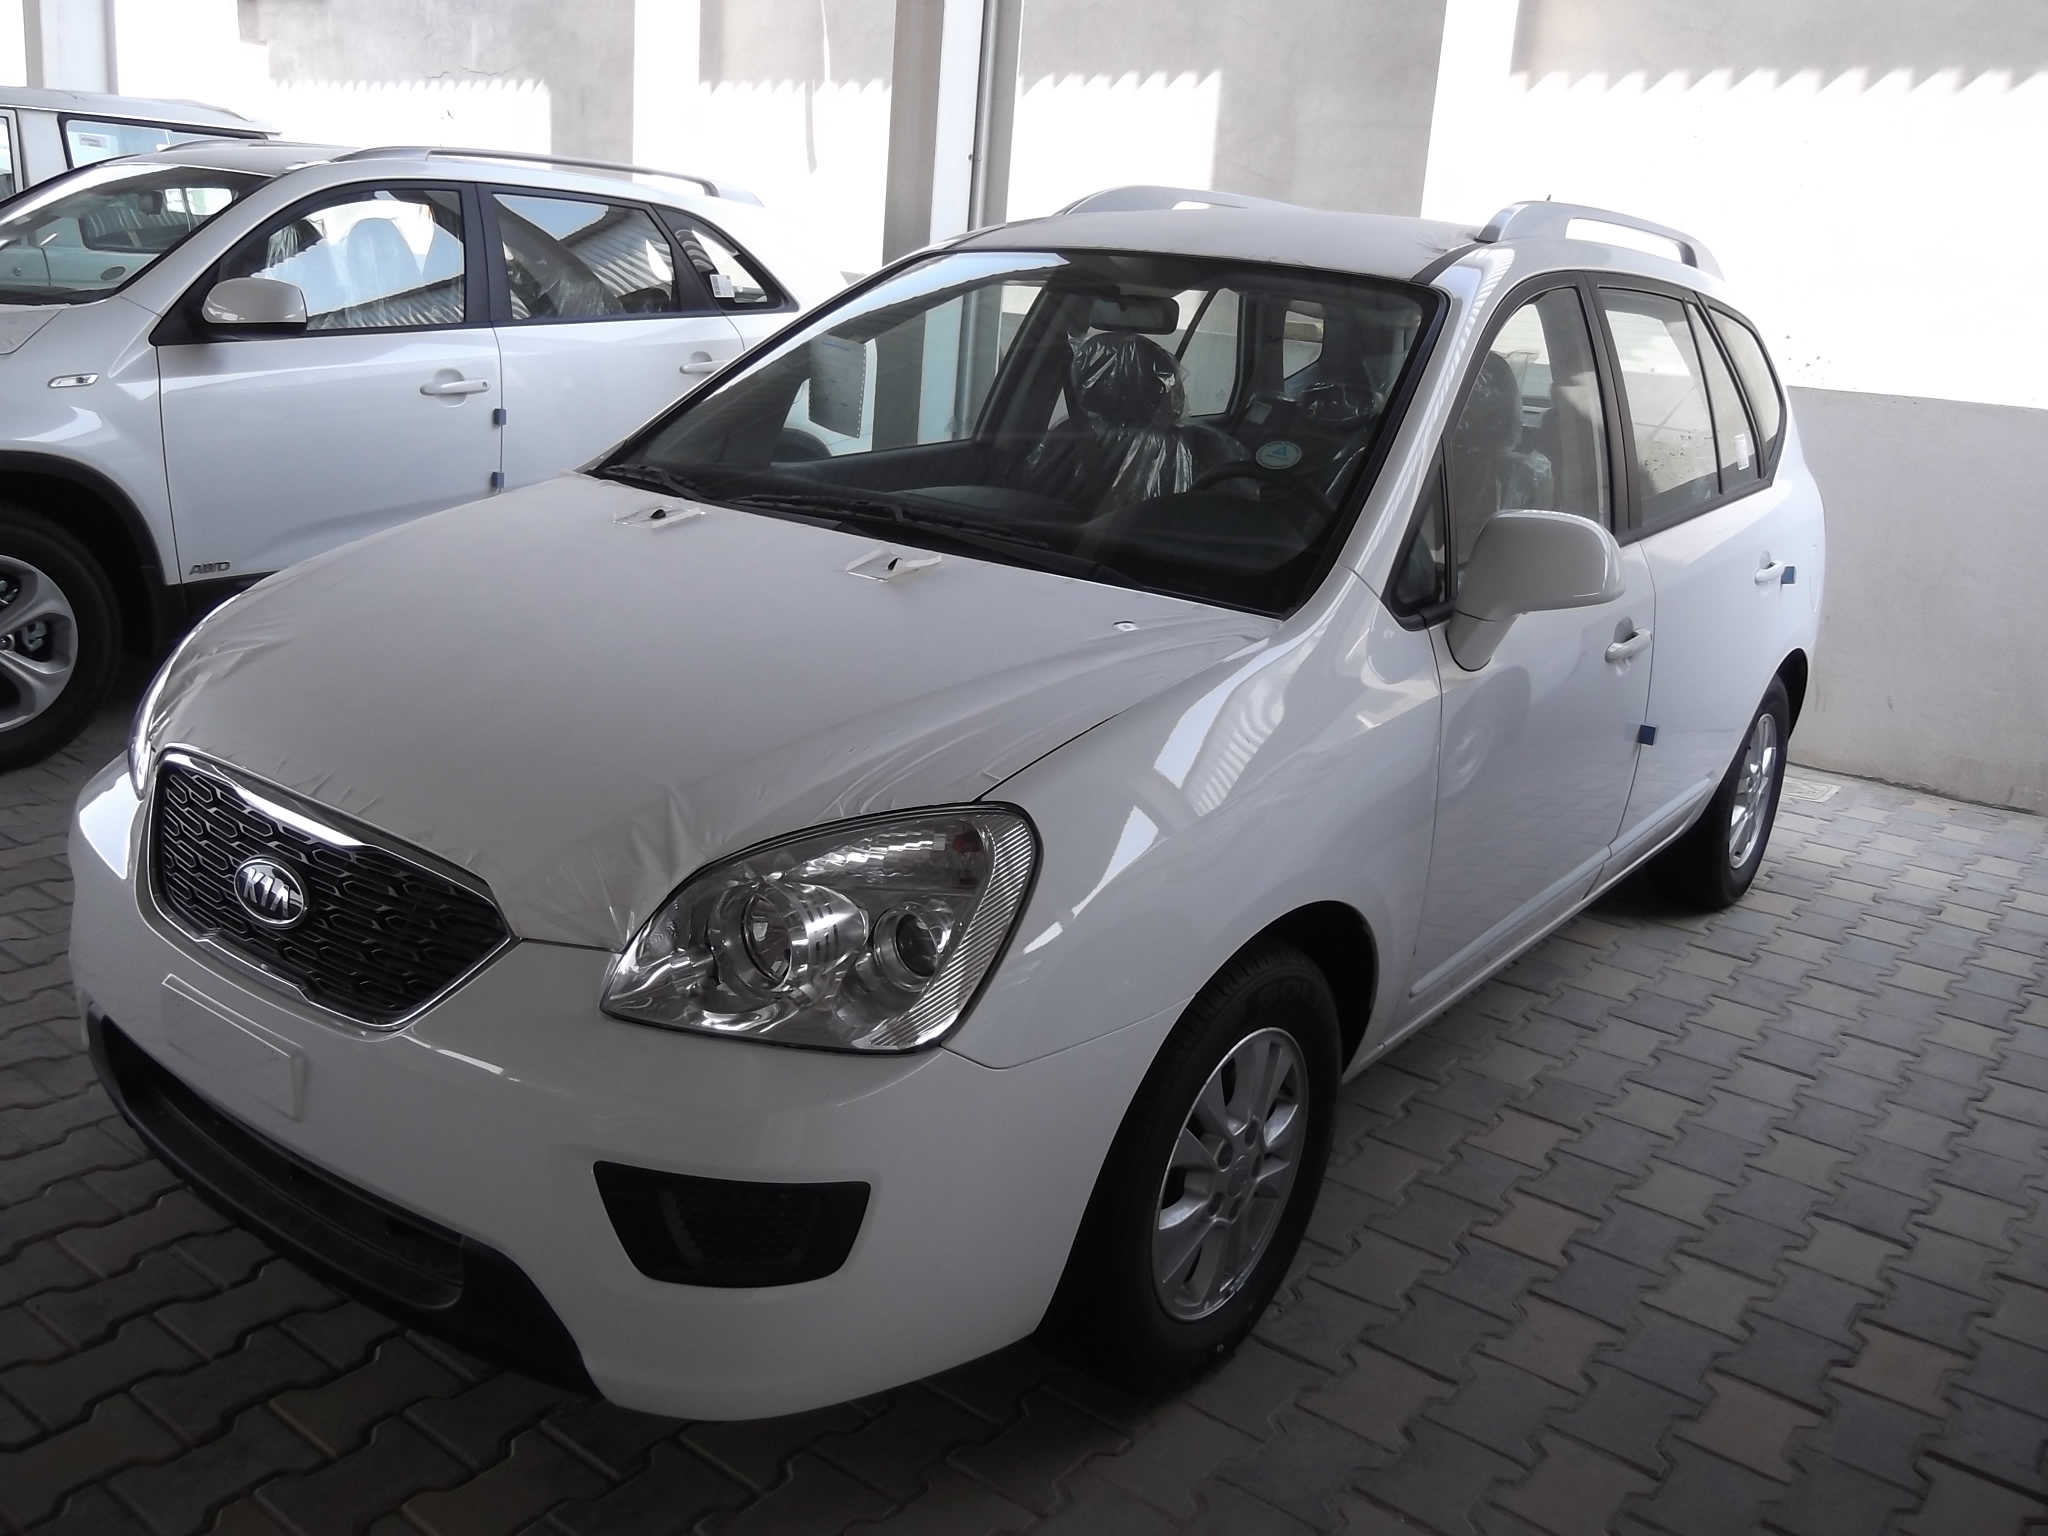 New and Used Cars KIA Carens 2013 for sale dmmam ksa